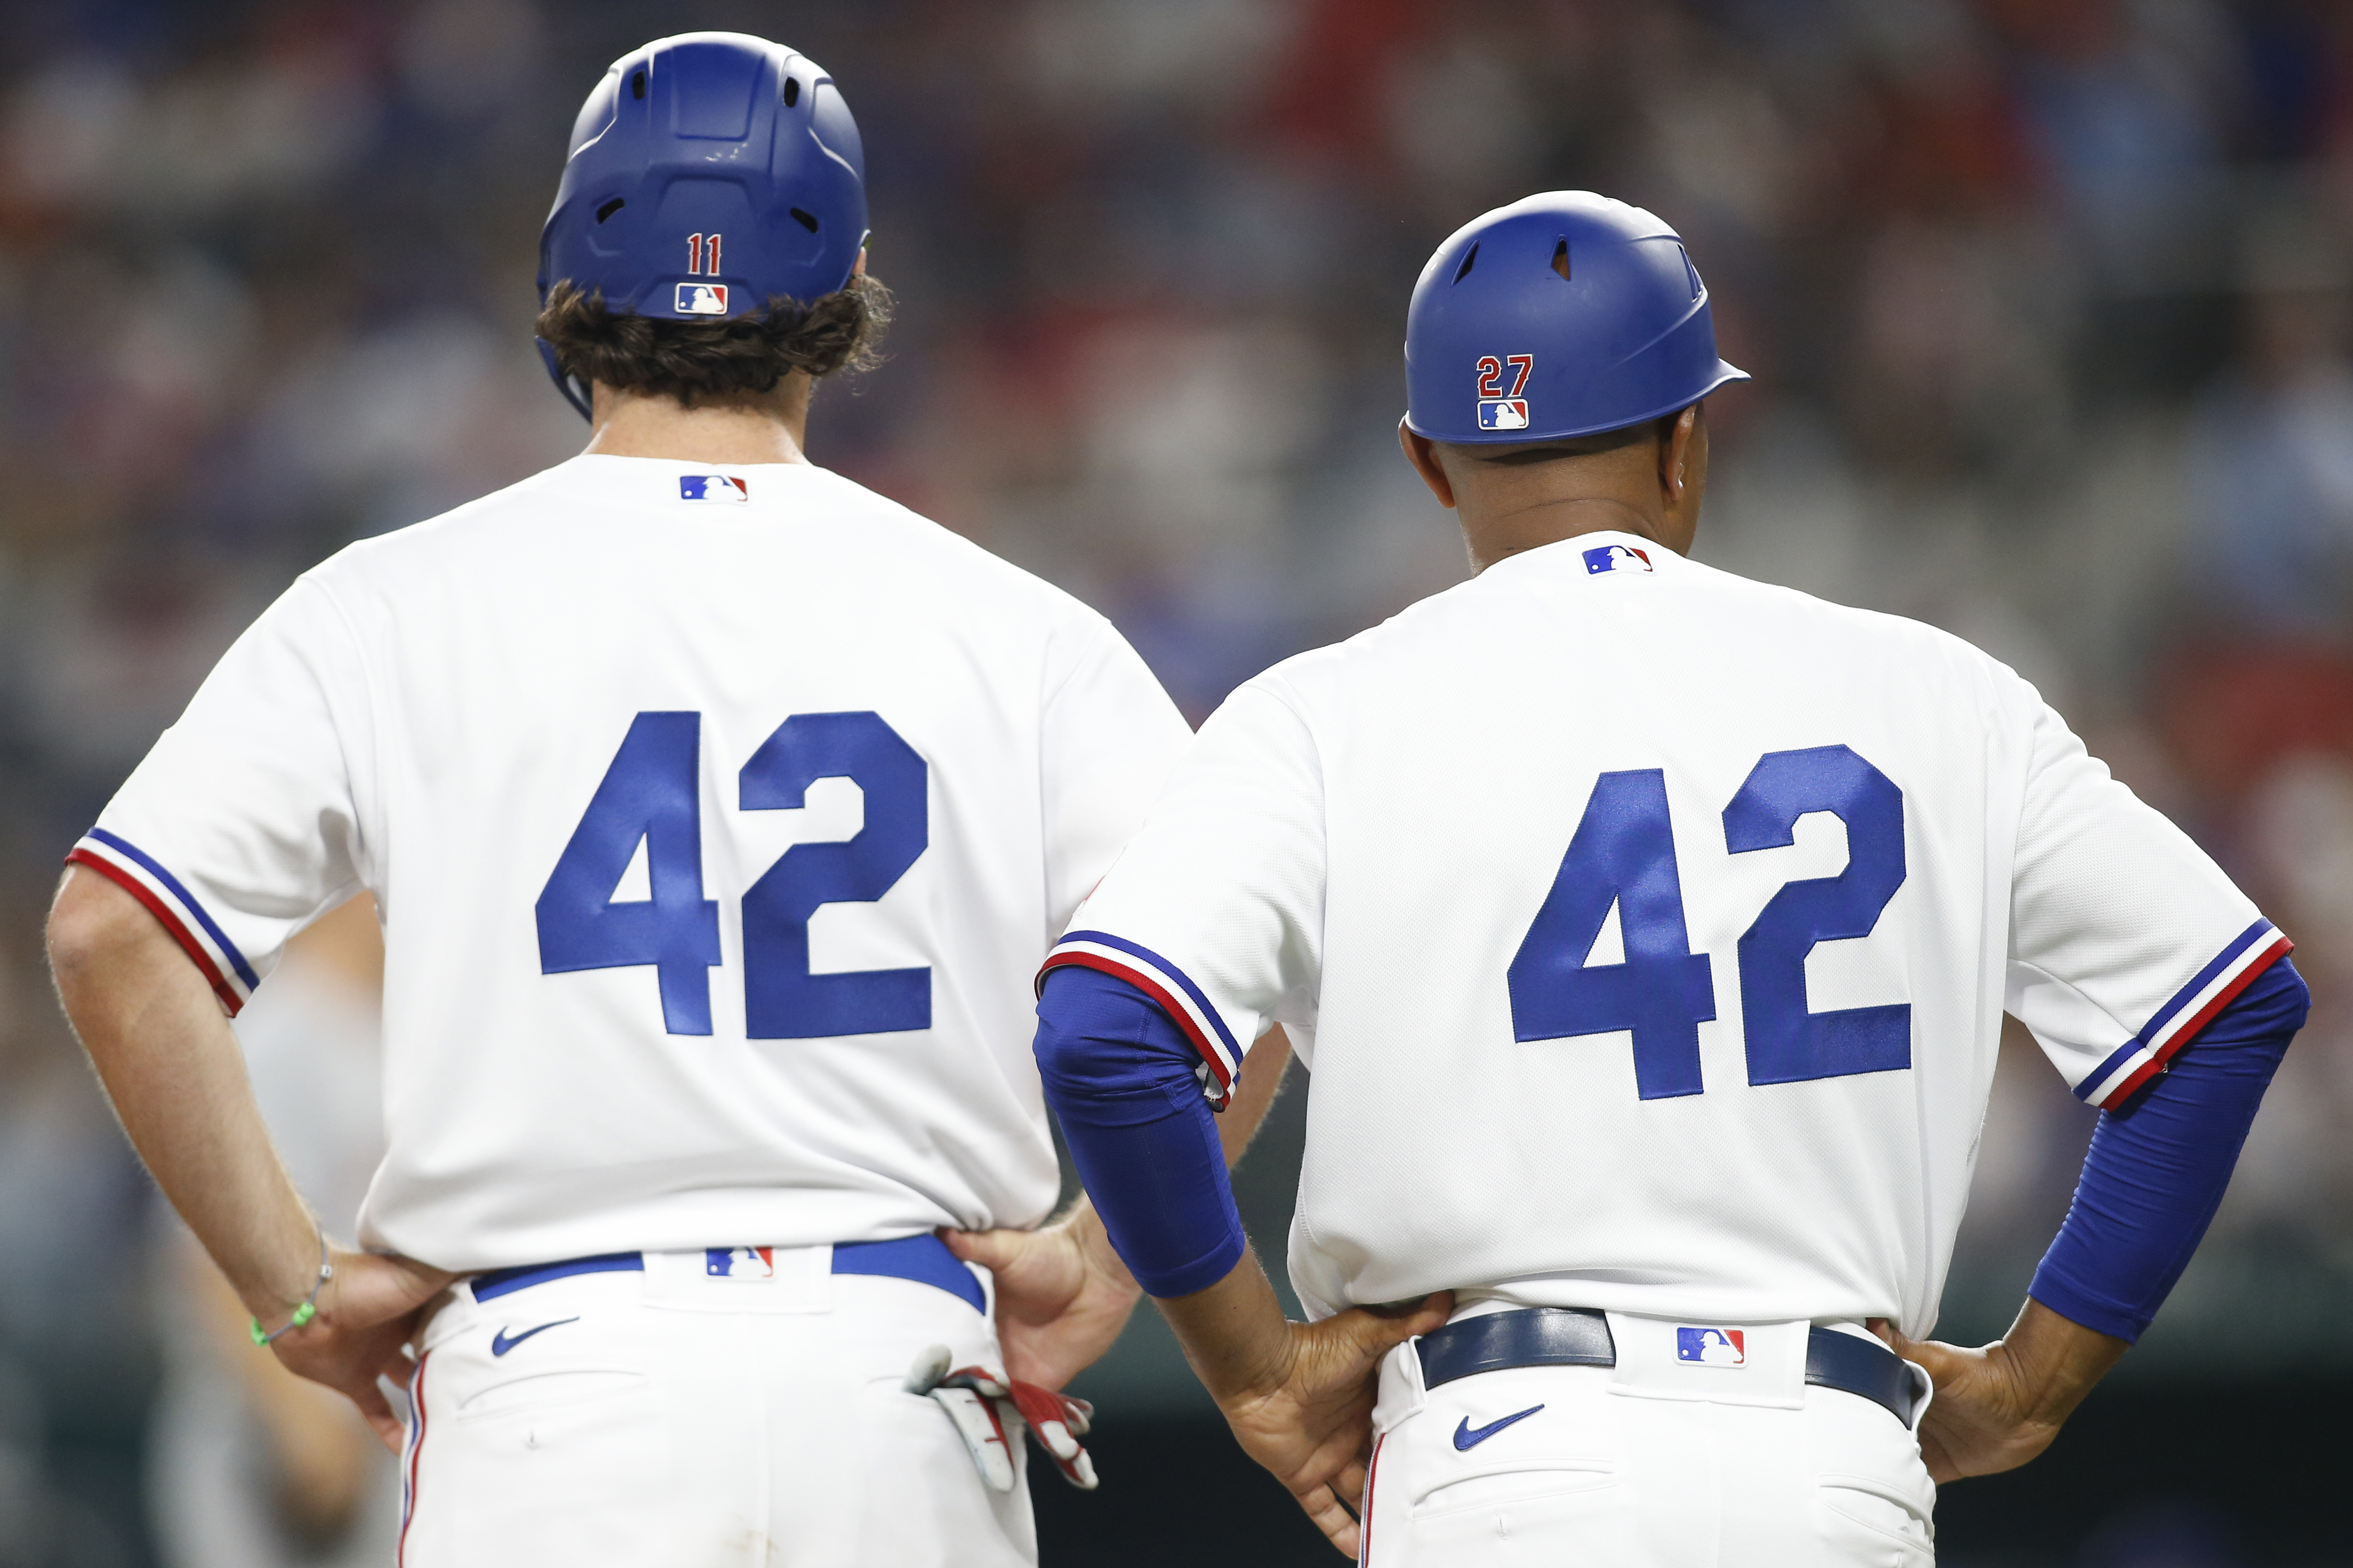 The Texas Rangers: Revisiting A Complicated Legend